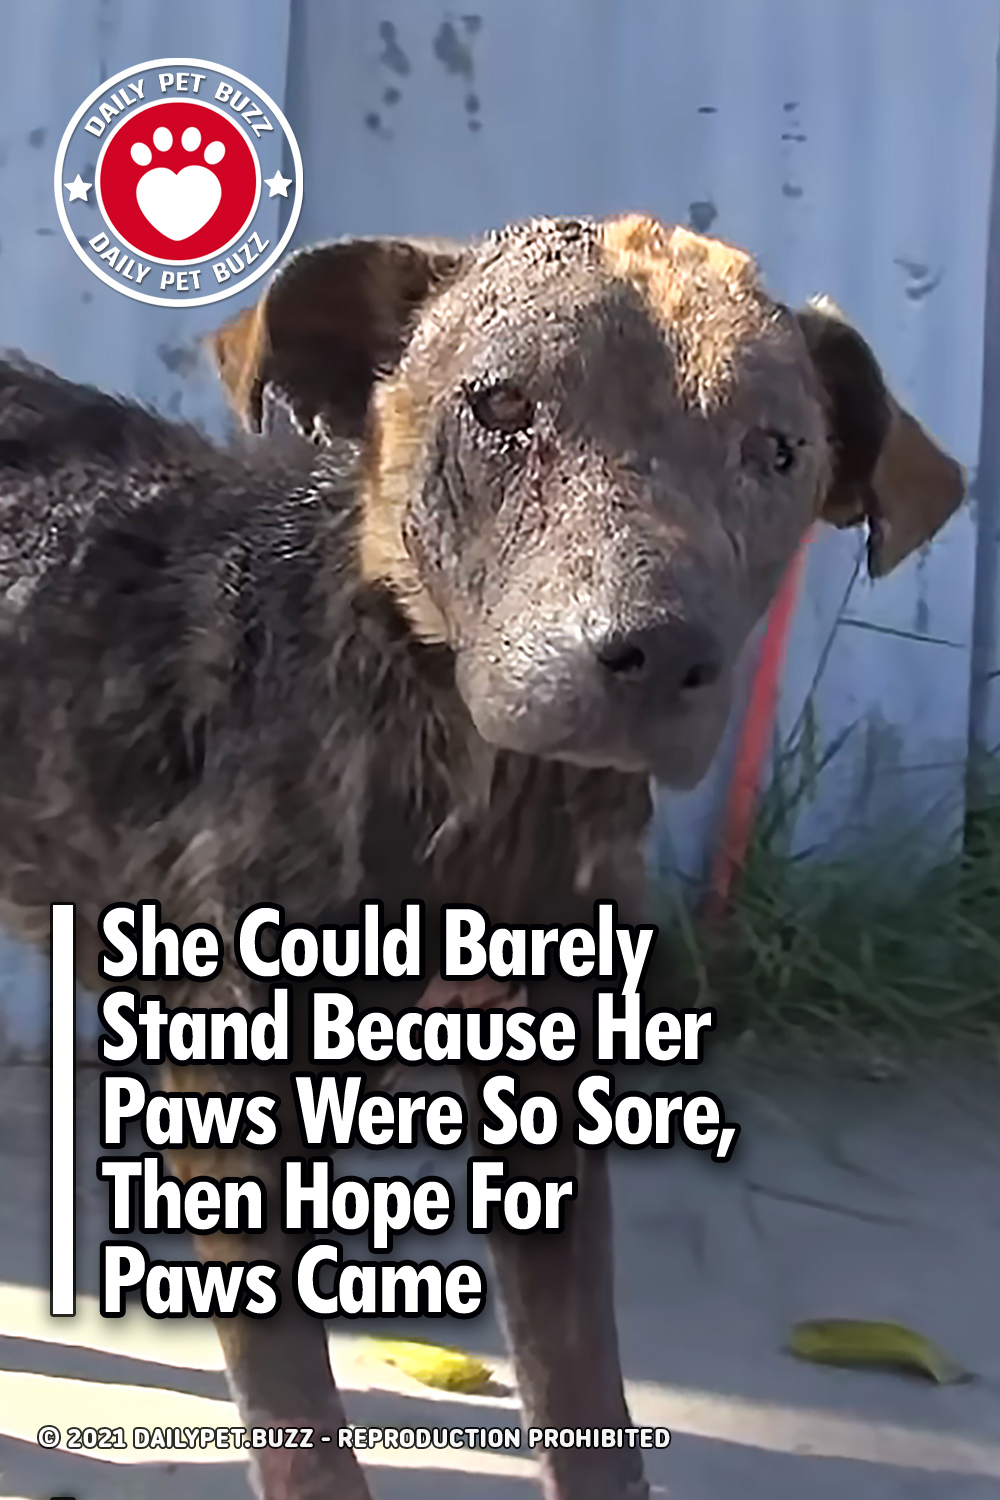 She Could Barely Stand Because Her Paws Were So Sore, Then Hope For Paws Came